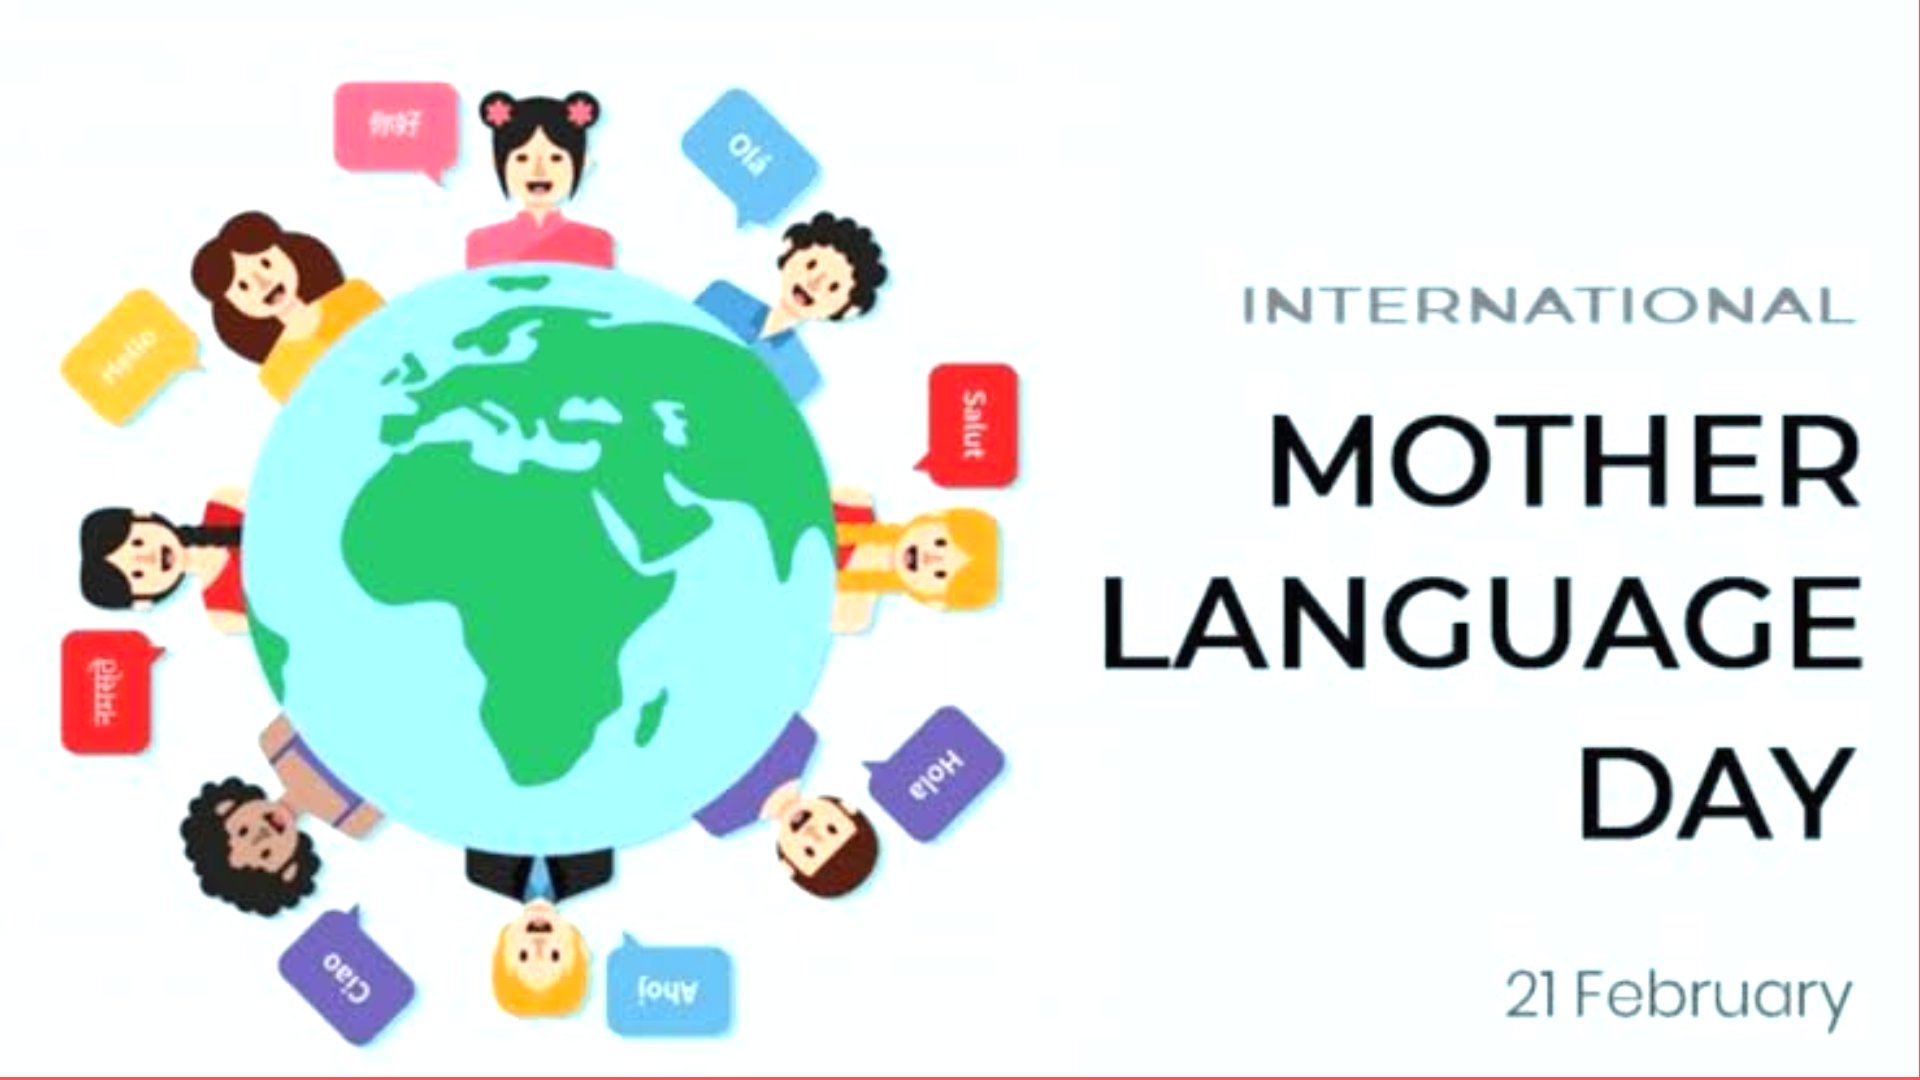 International mother language day 2023: Know everything related to the international mother language day